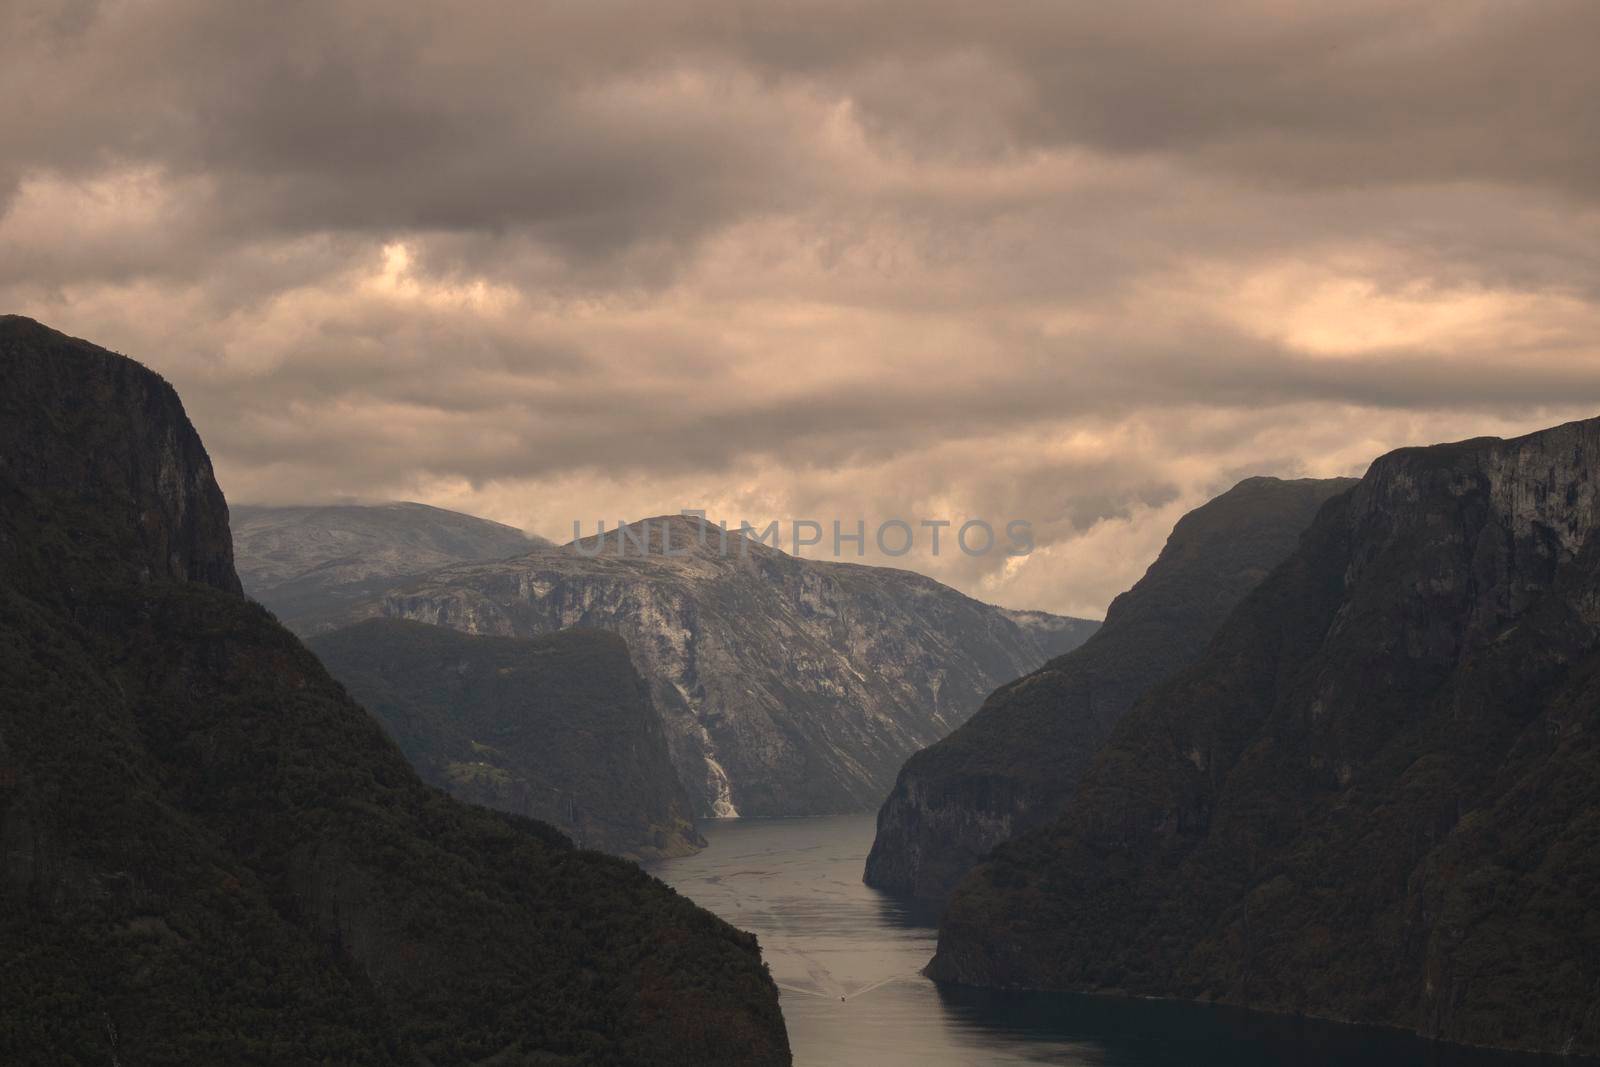 Stormy landscape showing Aurlandsfjord among some mountains from Stegastein viewpoint in Norway